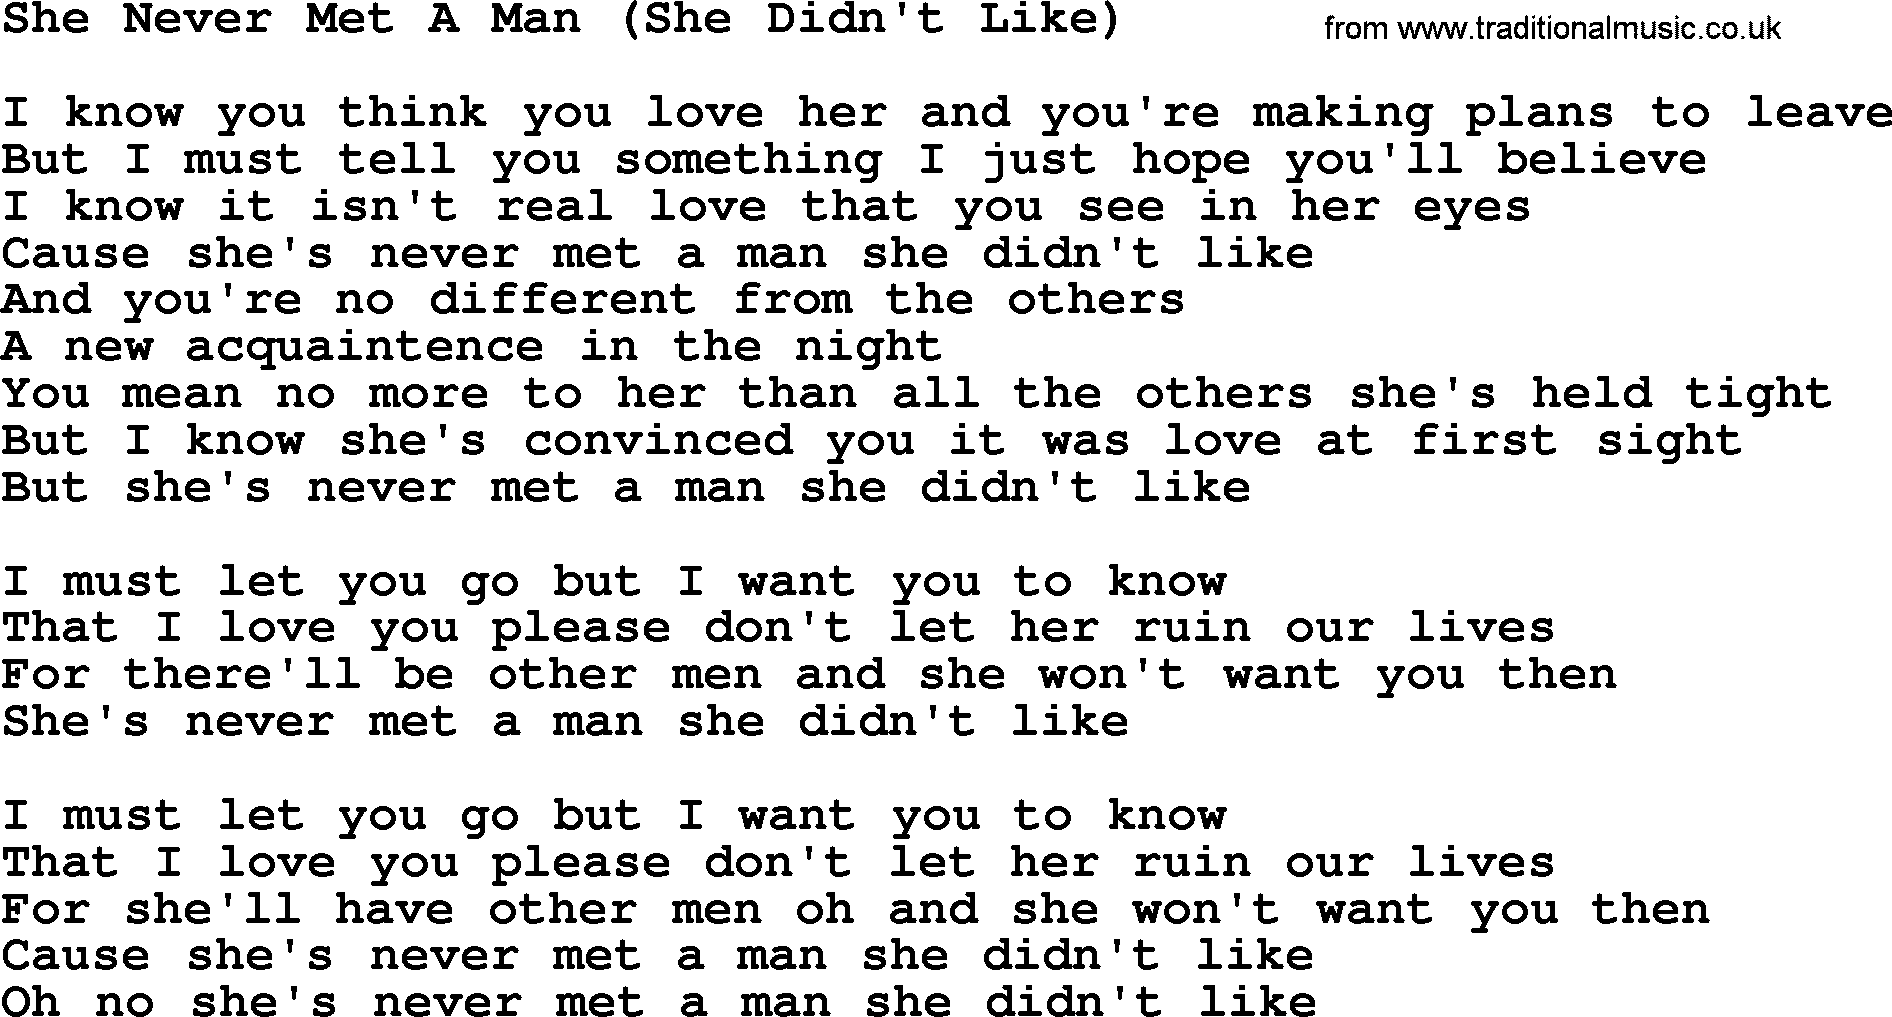 Dolly Parton song She Never Met A Man (She Didn't Like).txt lyrics